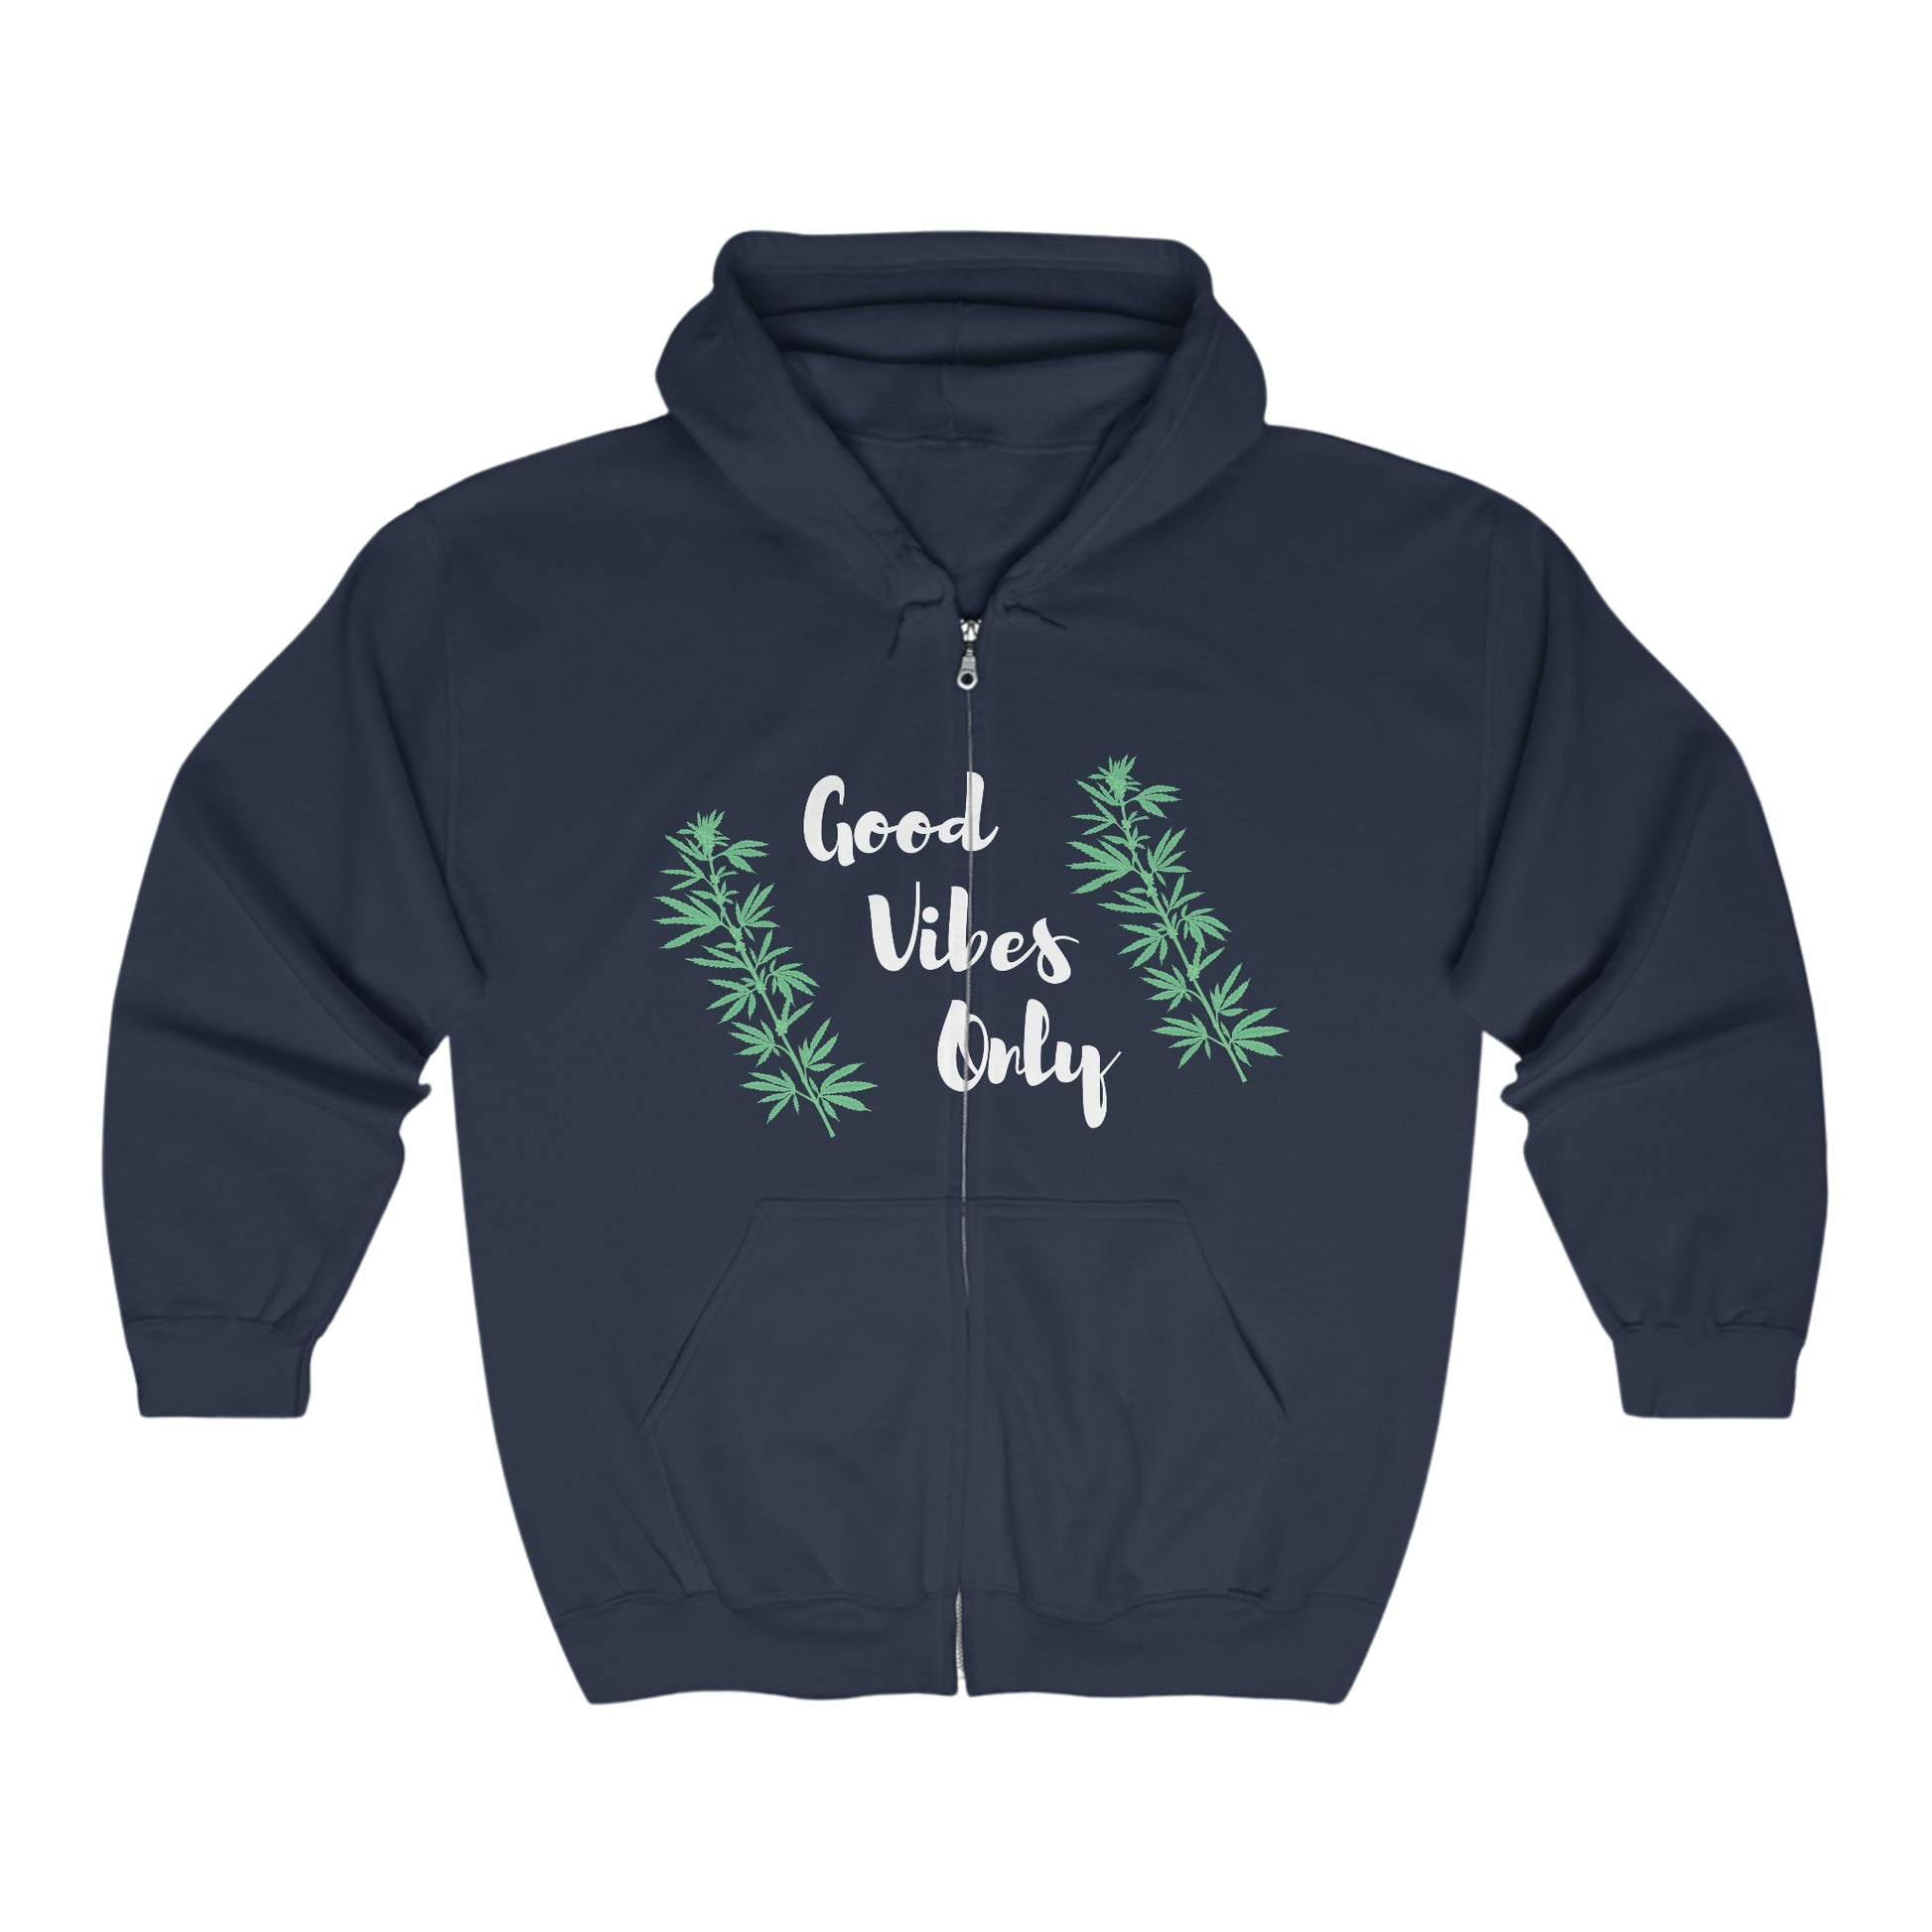 A navy blue Good Vibes Only weed zip up hoodie against a white background